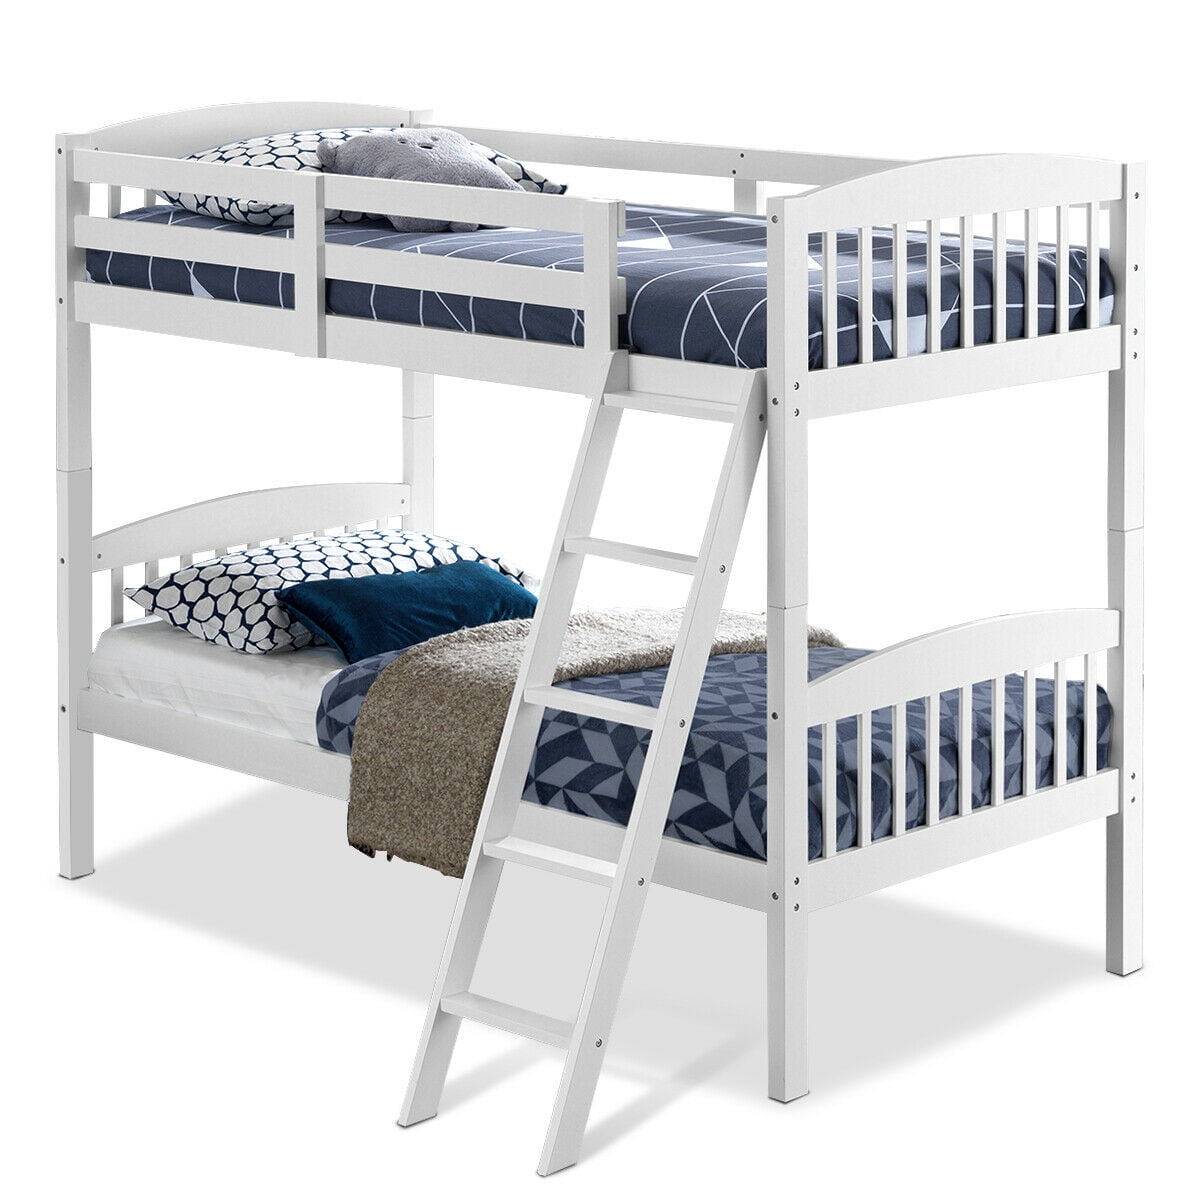 Gymax Wood Hardwood Twin Bunk Bed, Quality Wooden Bunk Beds